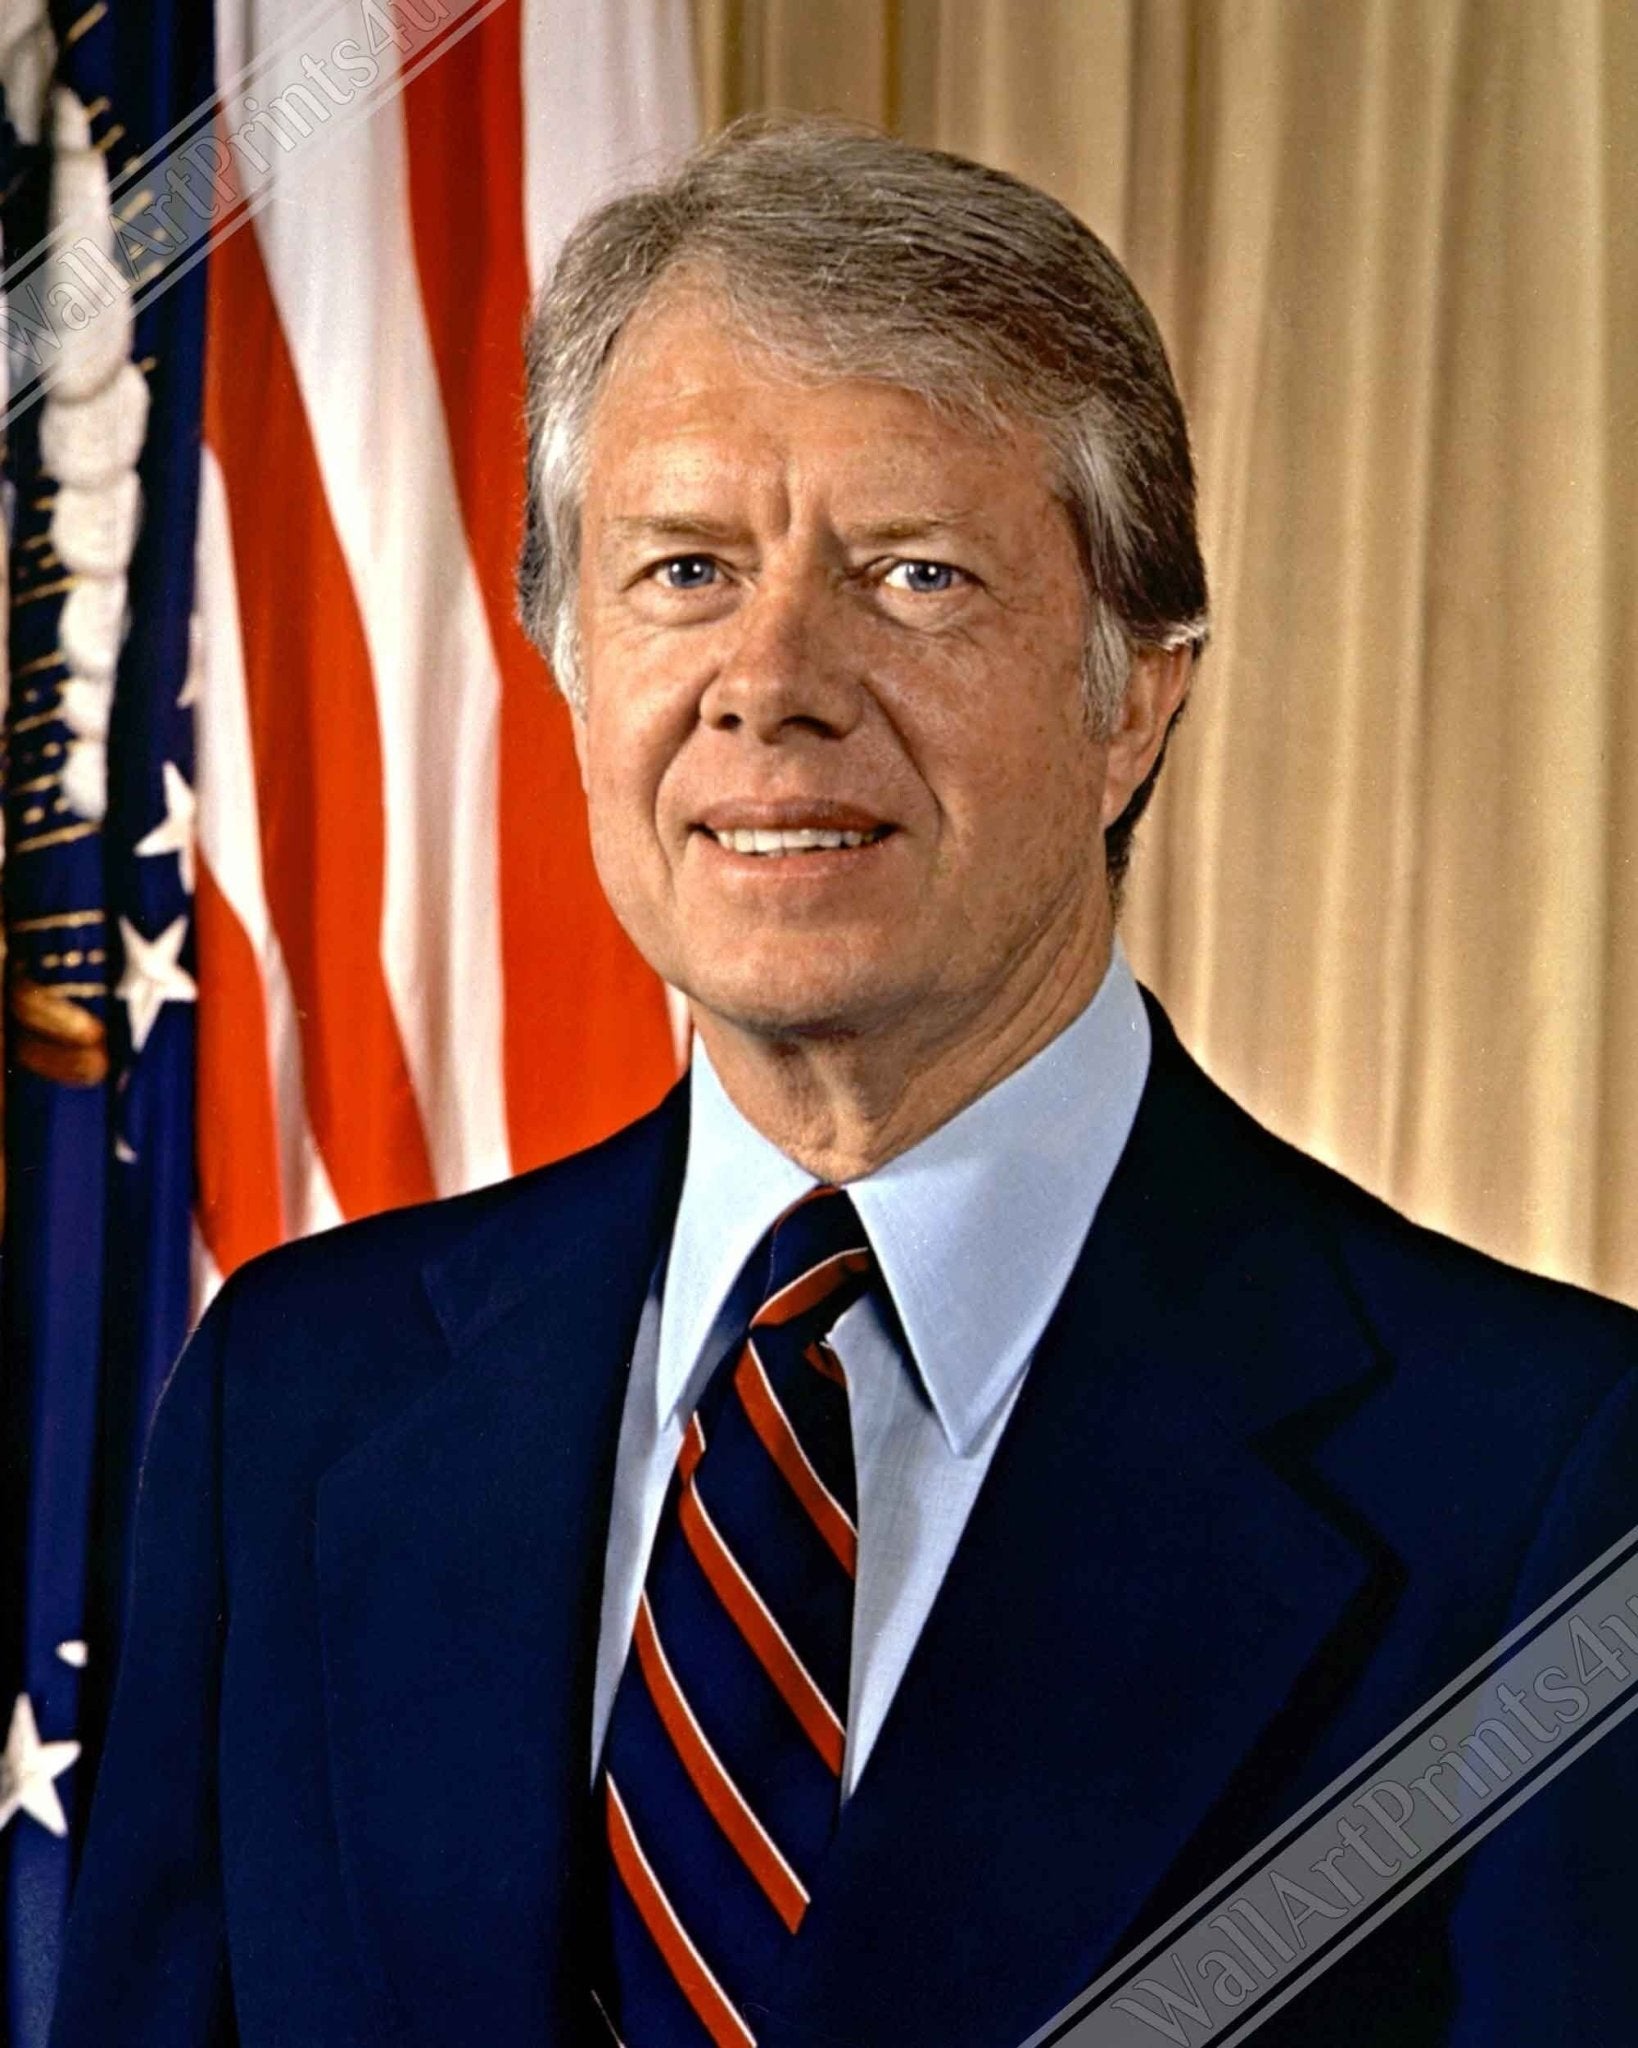 Jimmy Carter Poster, 39th President Of These United States, Vintage Photo Portrait - Jimmy Carter Print - WallArtPrints4U